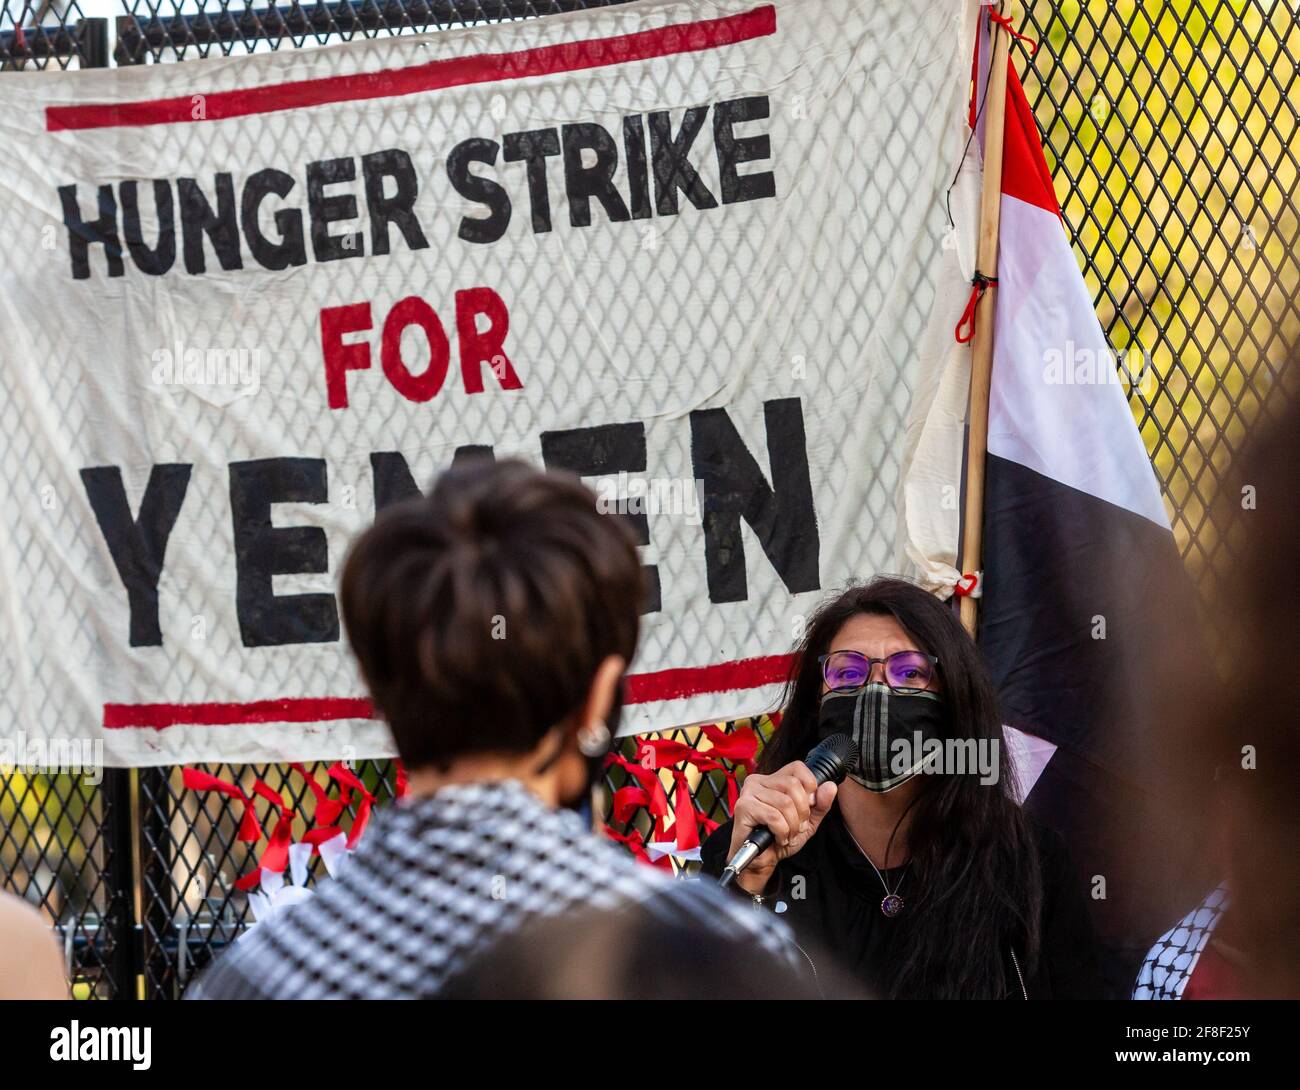 Washington, USA. 13th Apr, 2021. Representative Rashida Tlaib speaks at a vigil in memory of the victims of the war in Yemen, and in support of a 17-day hunger strike by women asking President Biden to end the fuel blockade. Credit: Allison Bailey/Alamy Live News Stock Photo